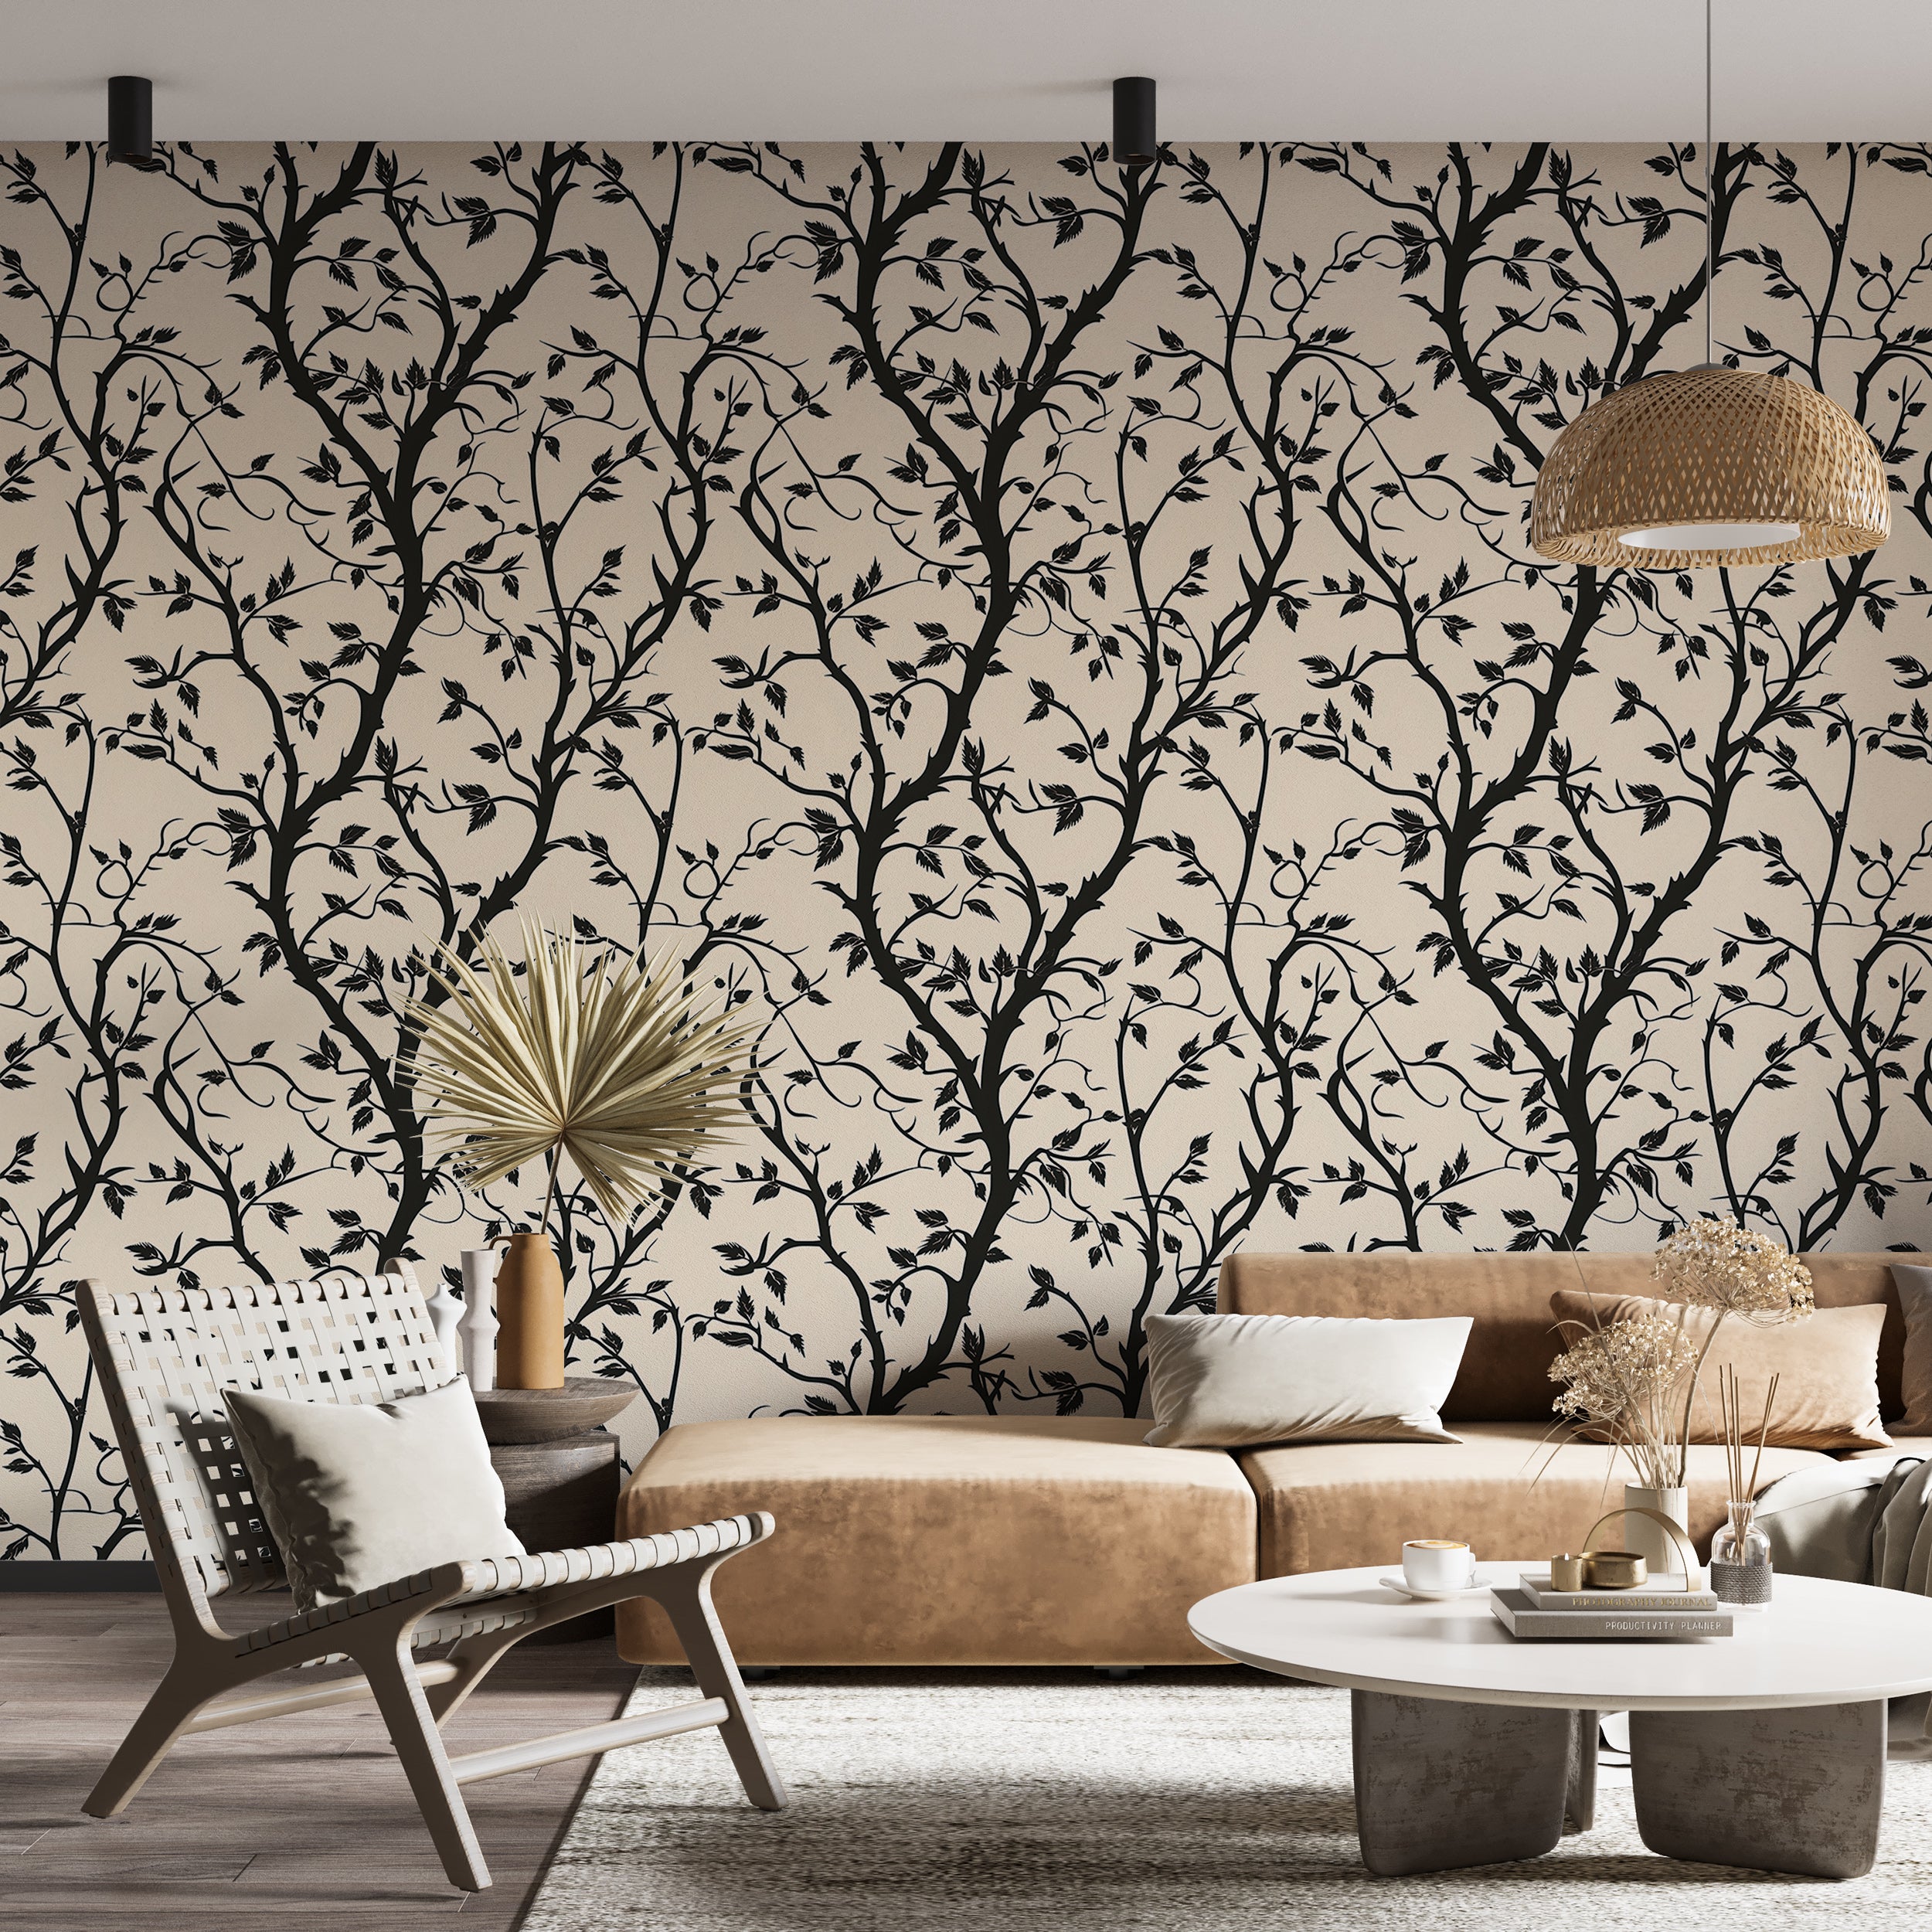 Gothic nature wallpaper peel and stick